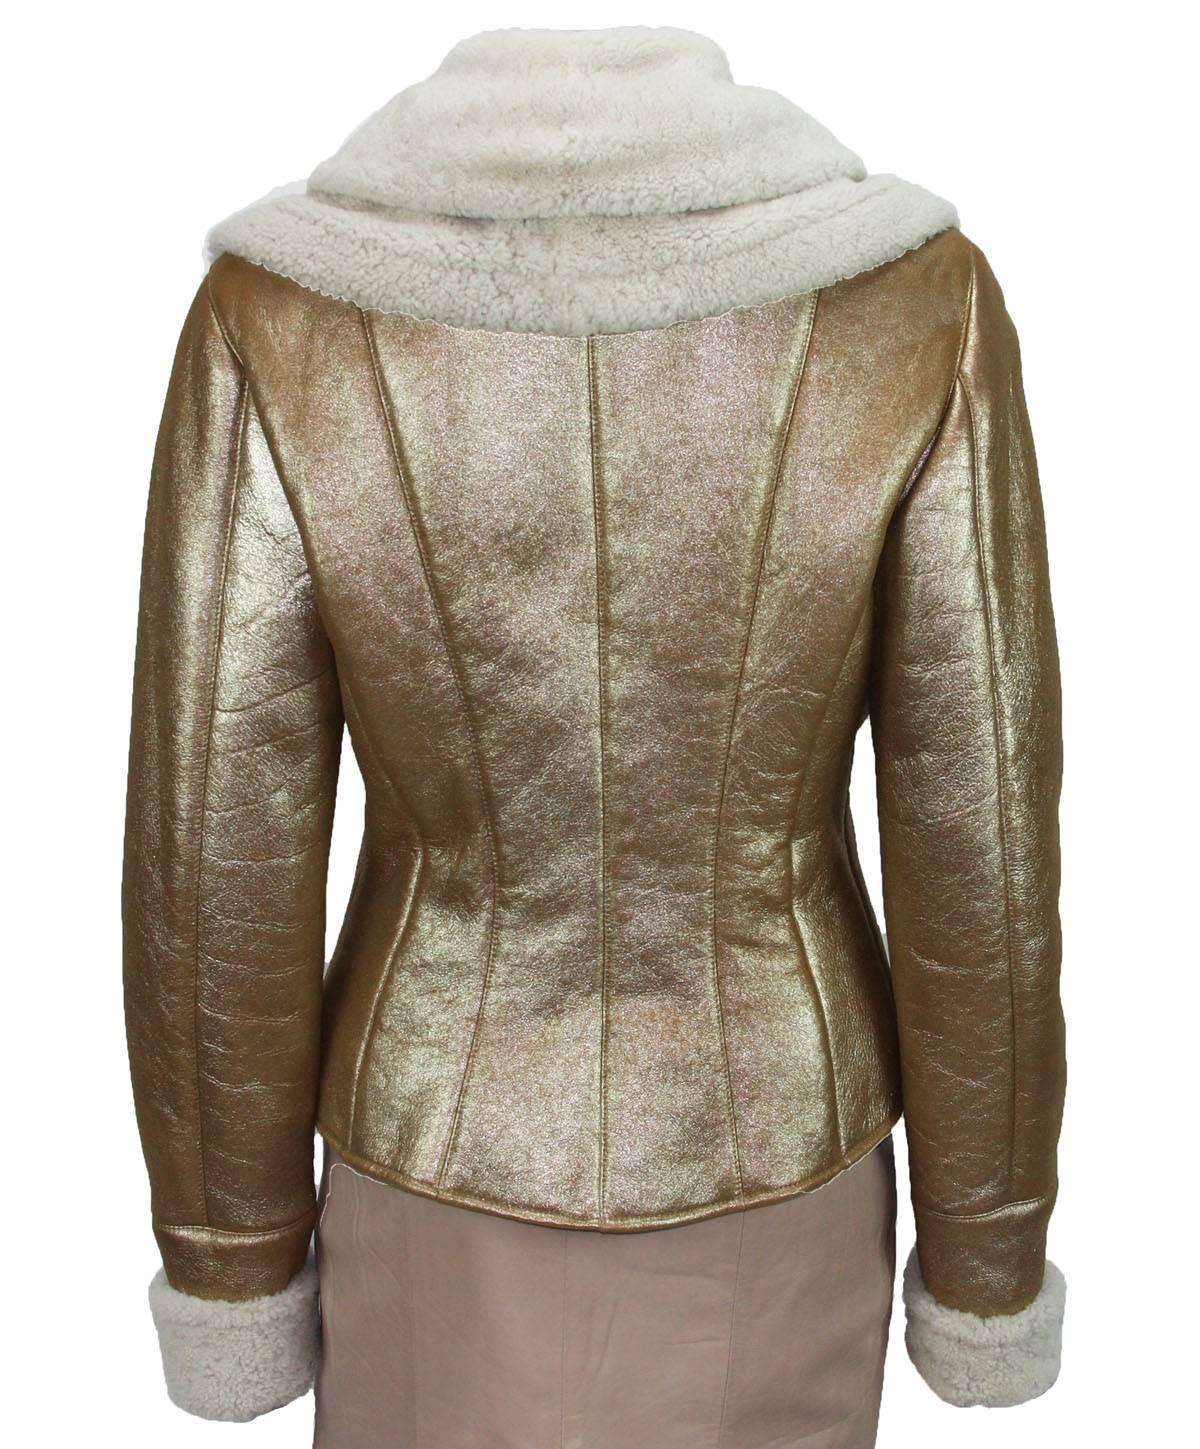 Brown New VALENTINO Metallic Gold Shearling Lambskin Leather Embellished Jacket size 6